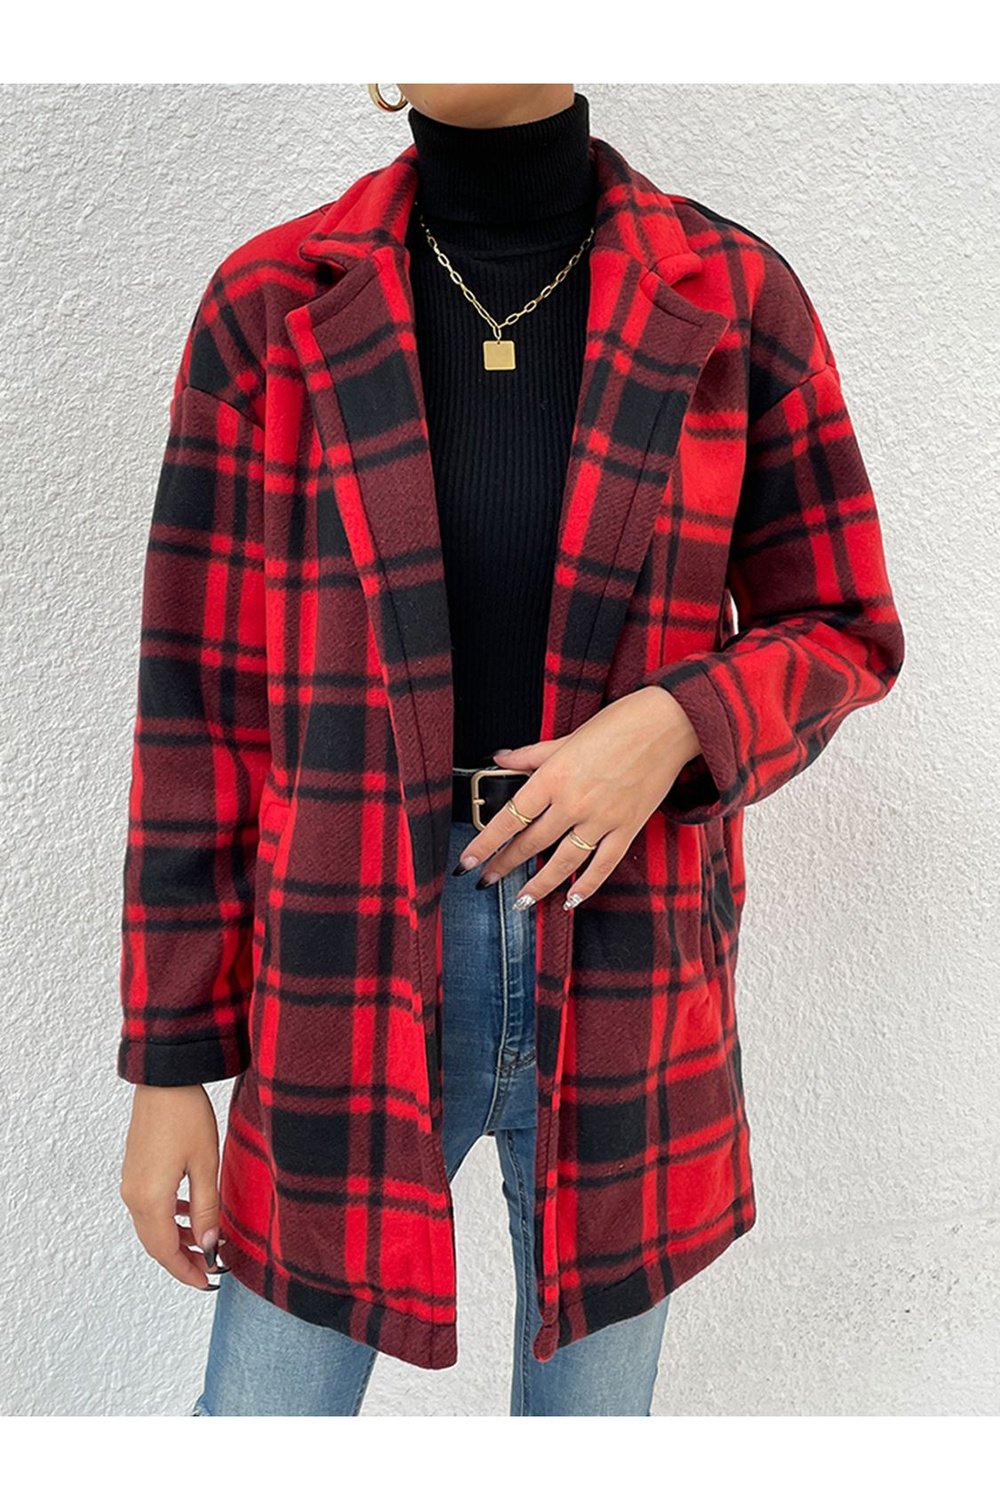 Plaid Lapel Collar Coat with Pockets - Jackets - FITGGINS